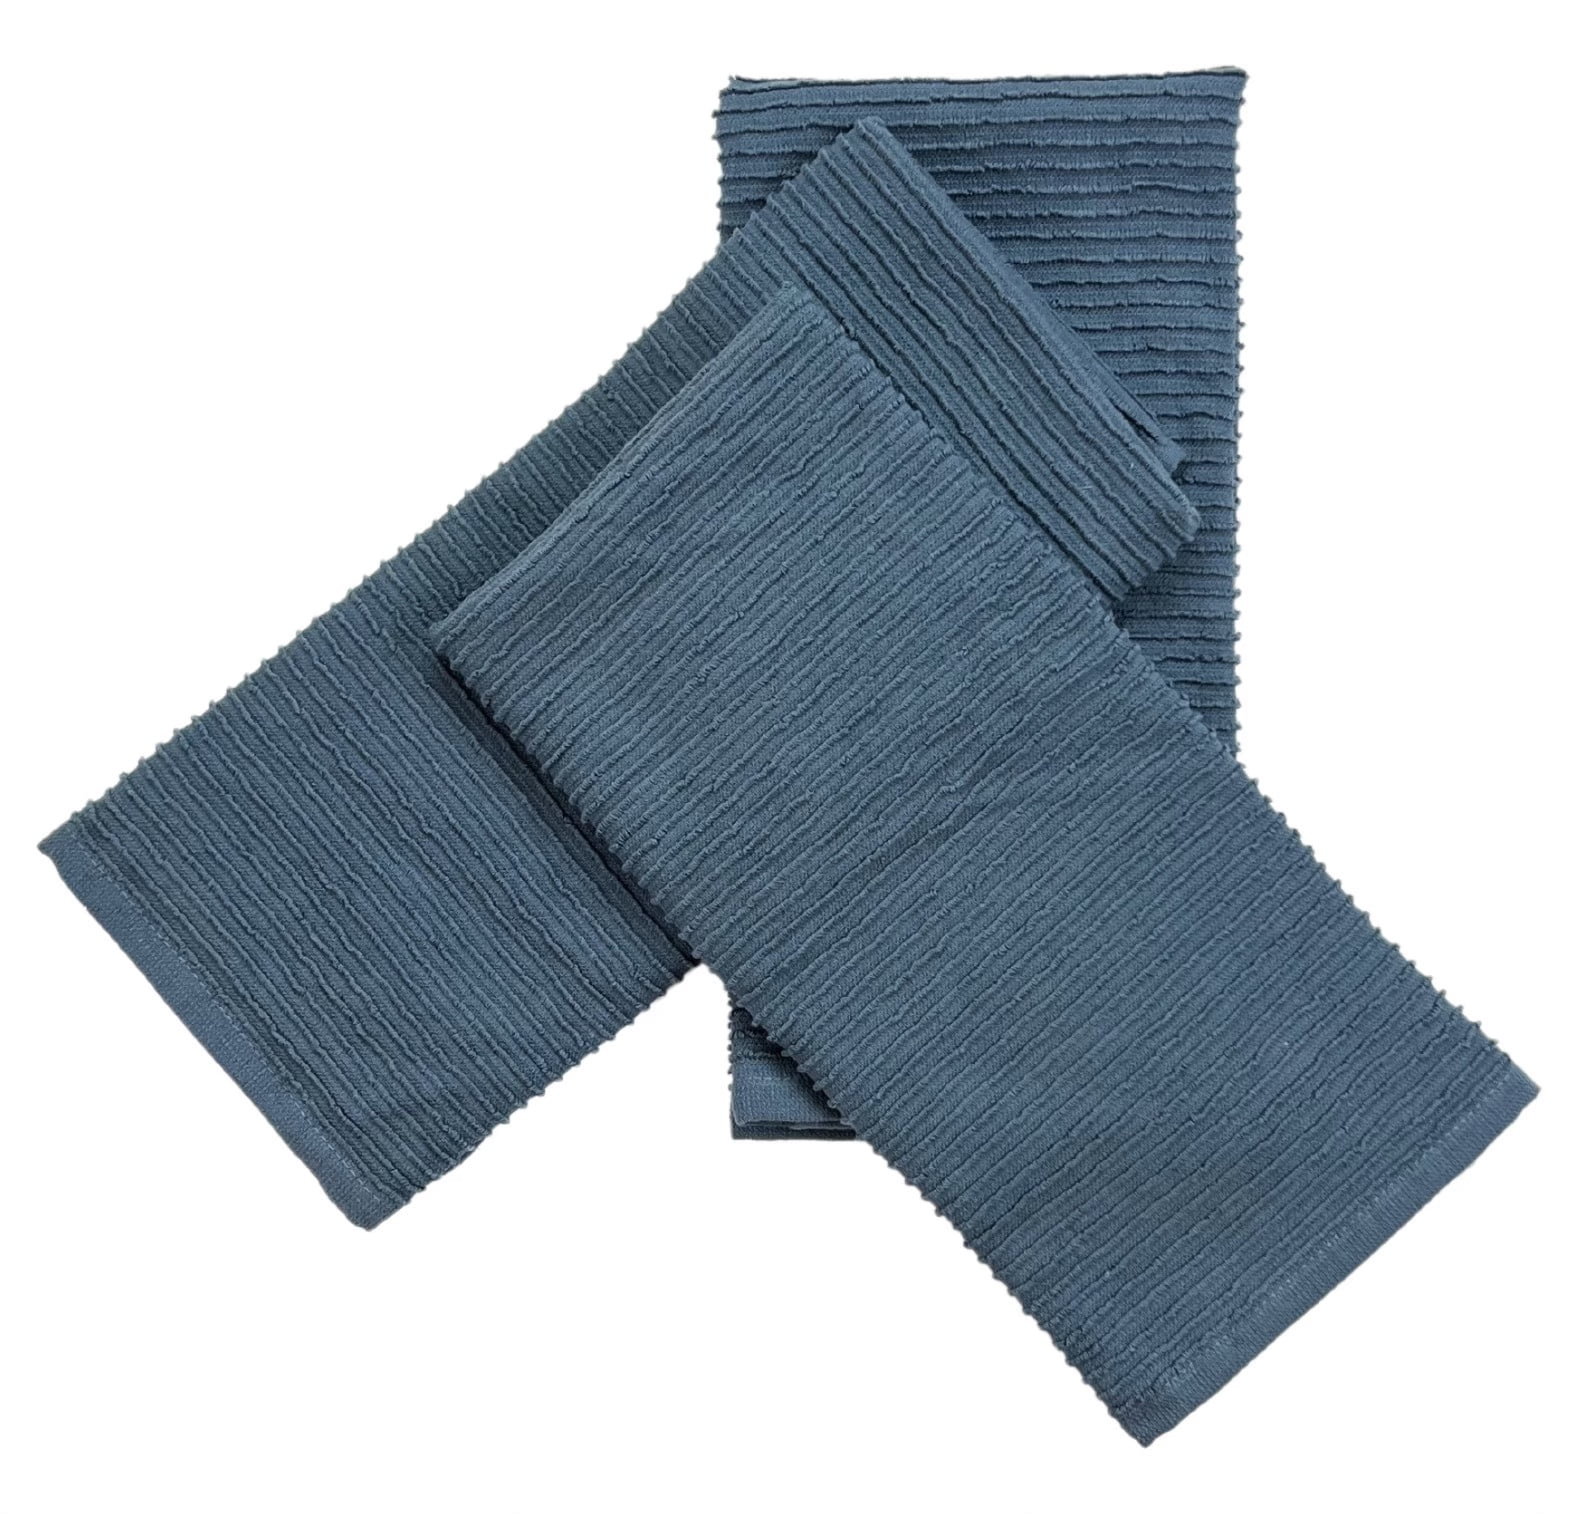 Serafina Home Navy Blue Kitchen Dish Towels: 100% Cotton Cloth Soft  Cleaning Drying Absorbent Textured Terry Loop, Set of 3 Multipurpose for  Everyday